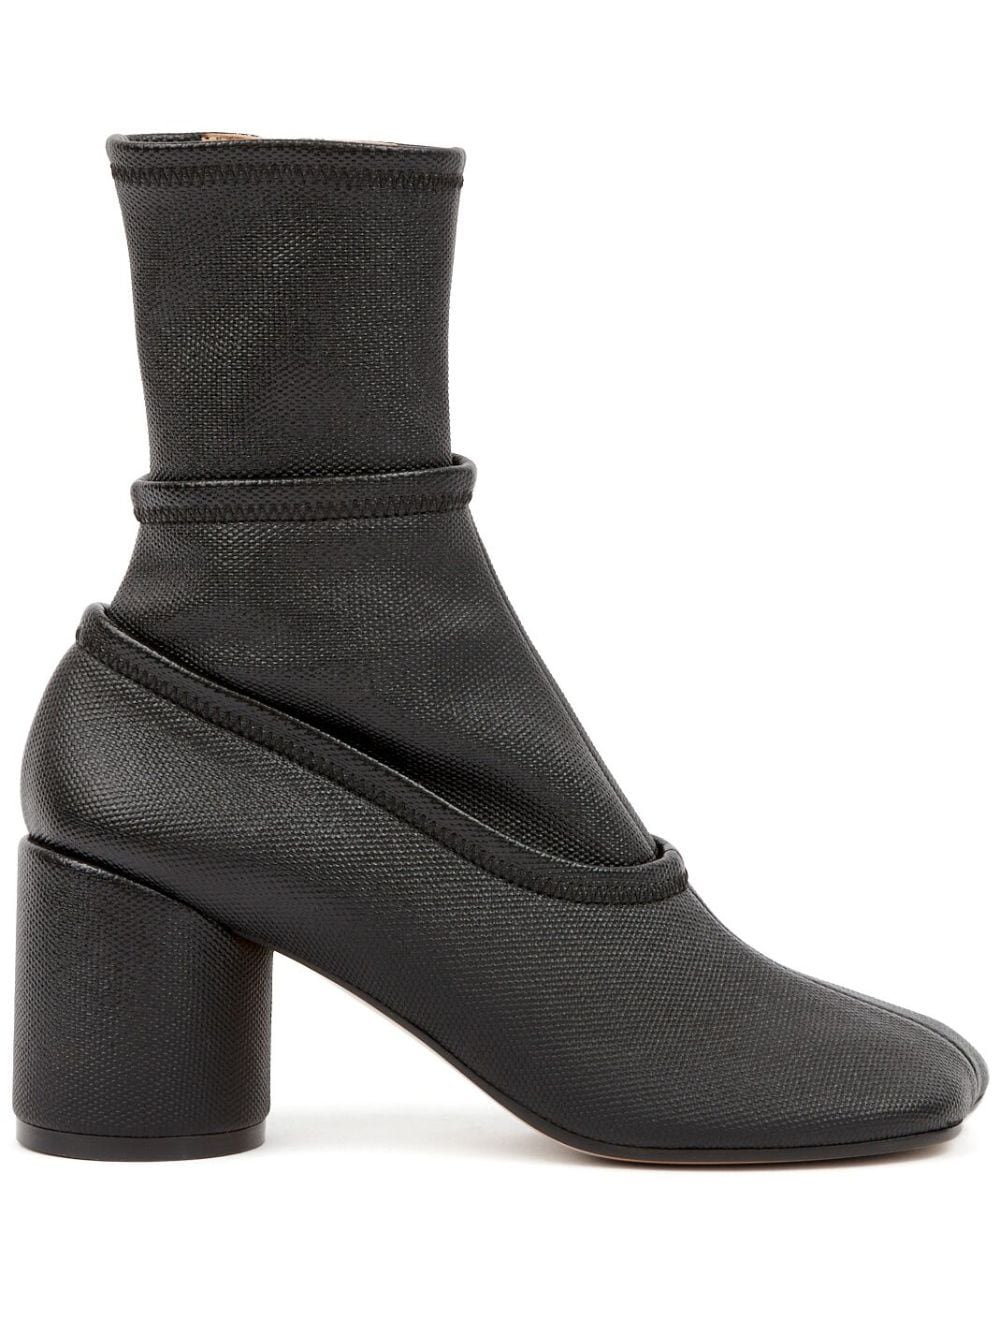 Mm6 Maison Margiela Tabi 70mm Leather Ankle Boots In Black